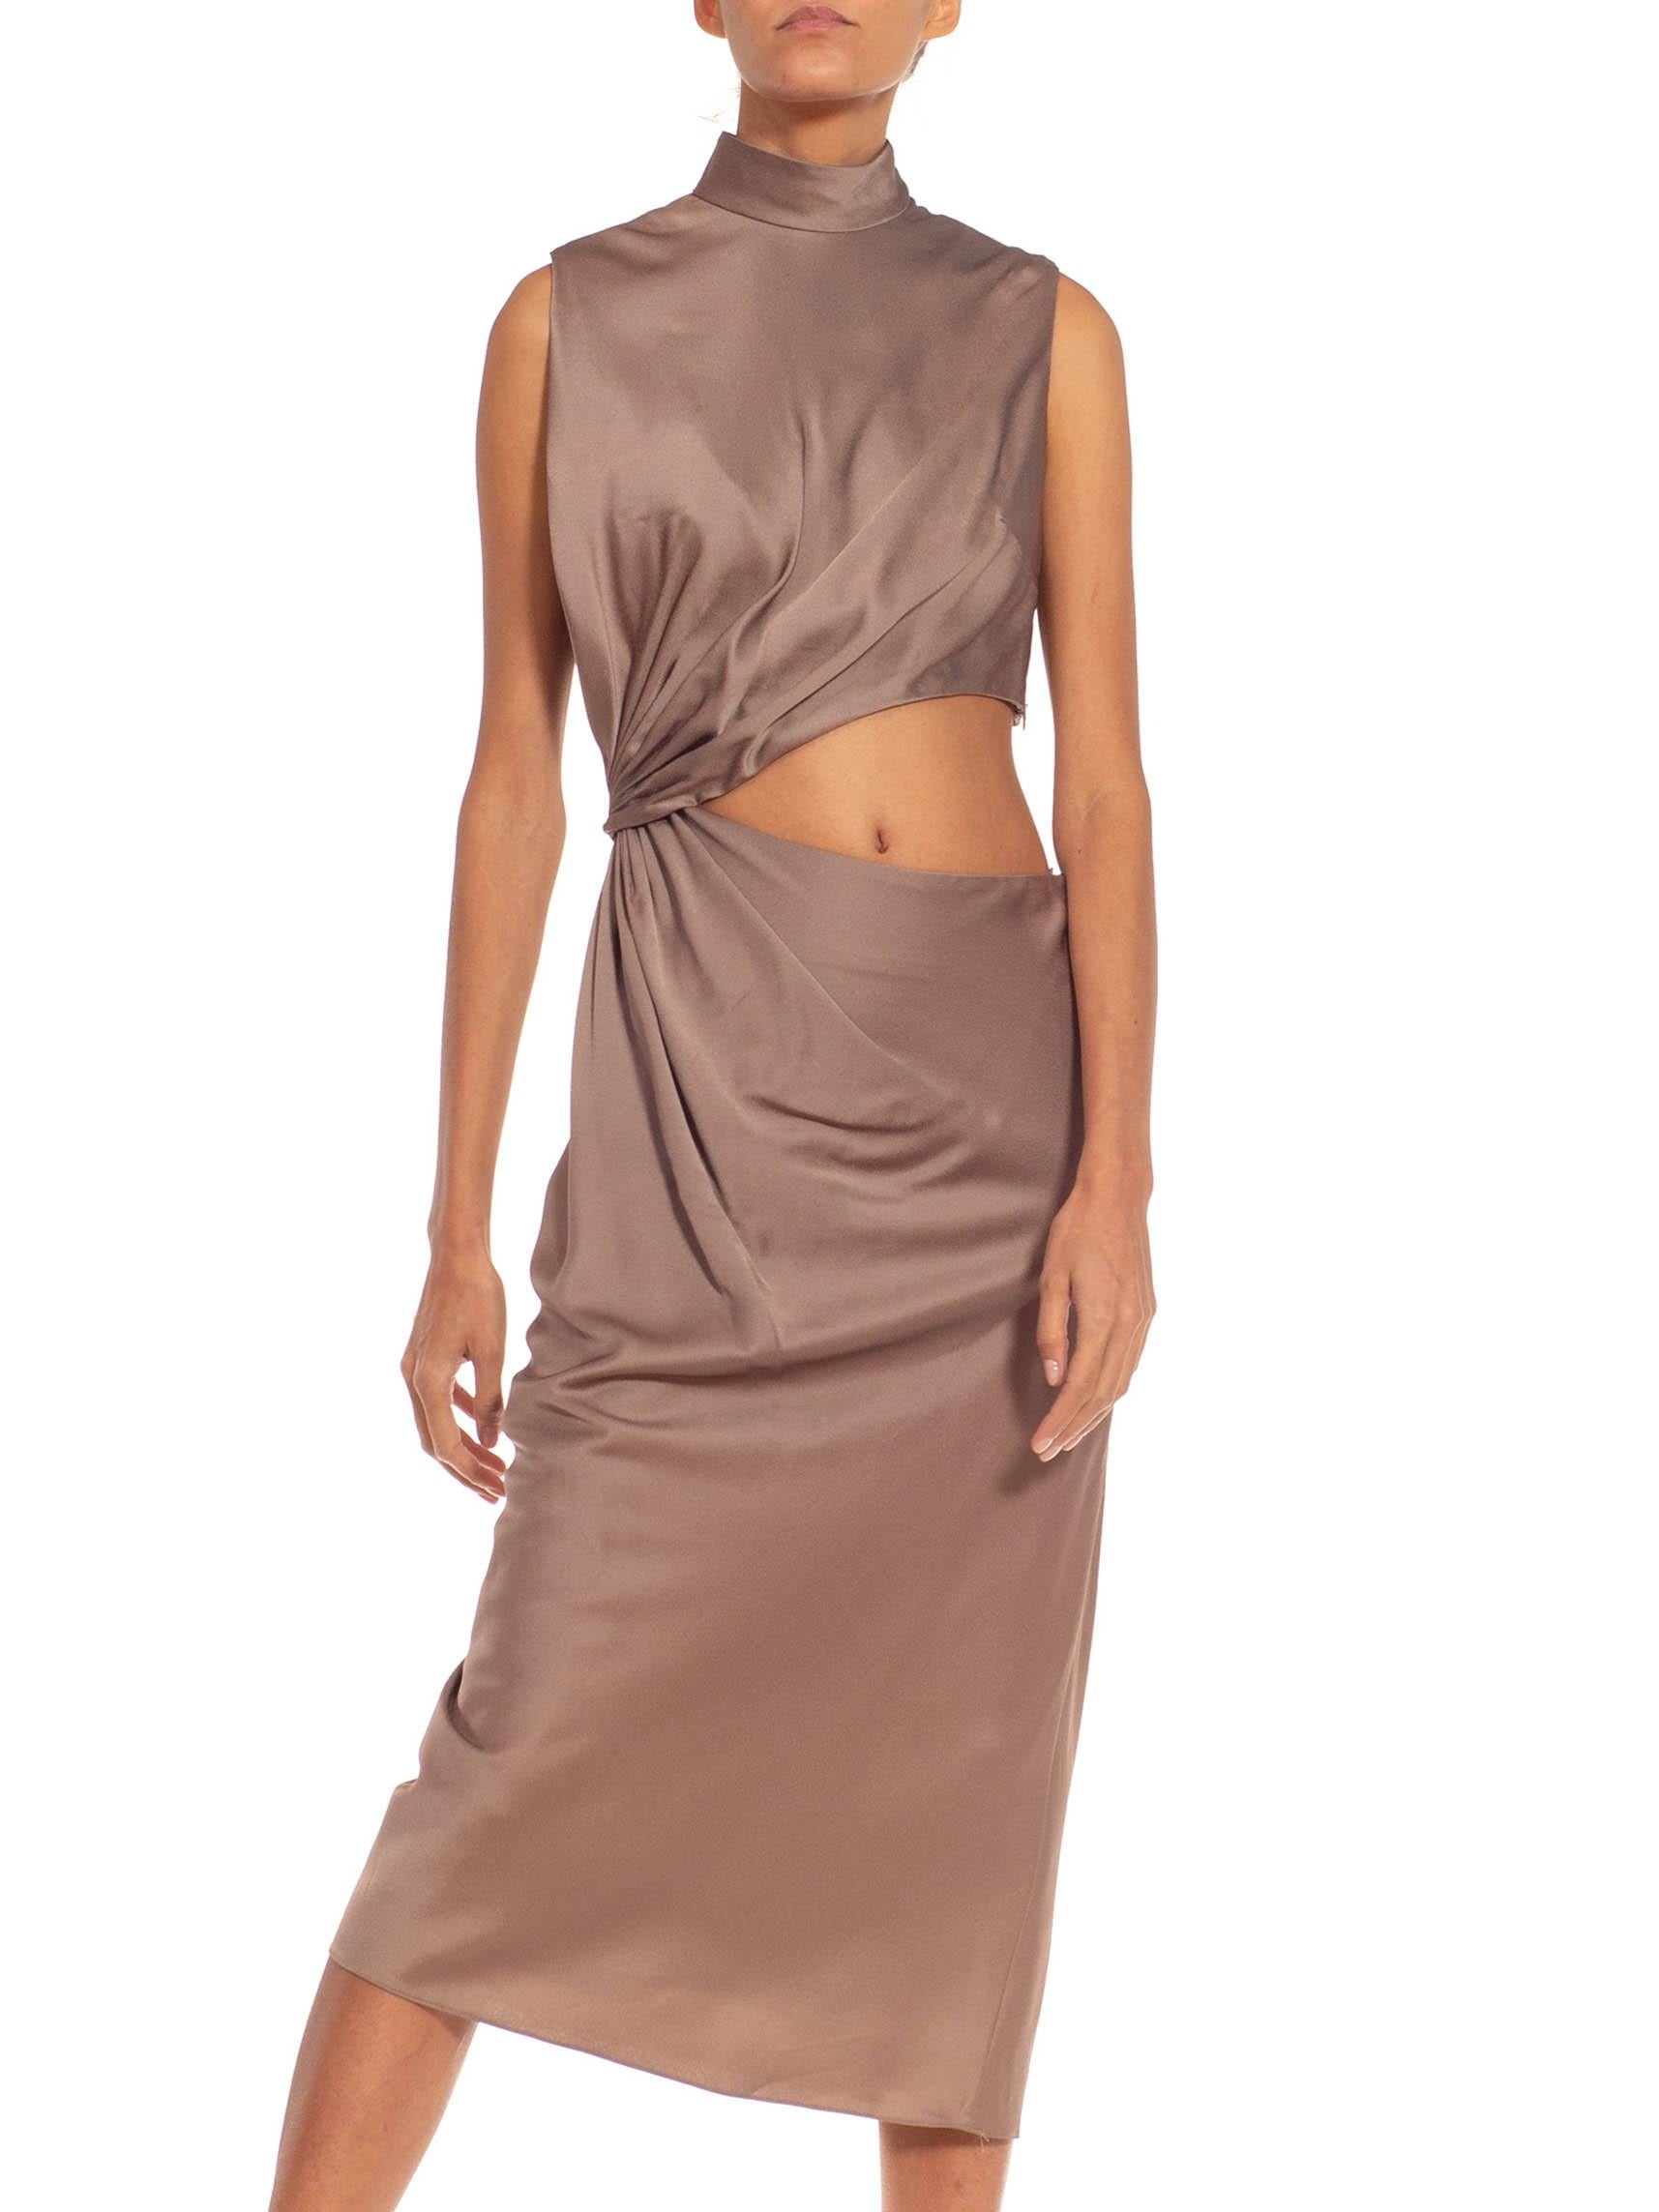 2010S JASON WU Grey Silk Fully Lined Dress In Excellent Condition For Sale In New York, NY